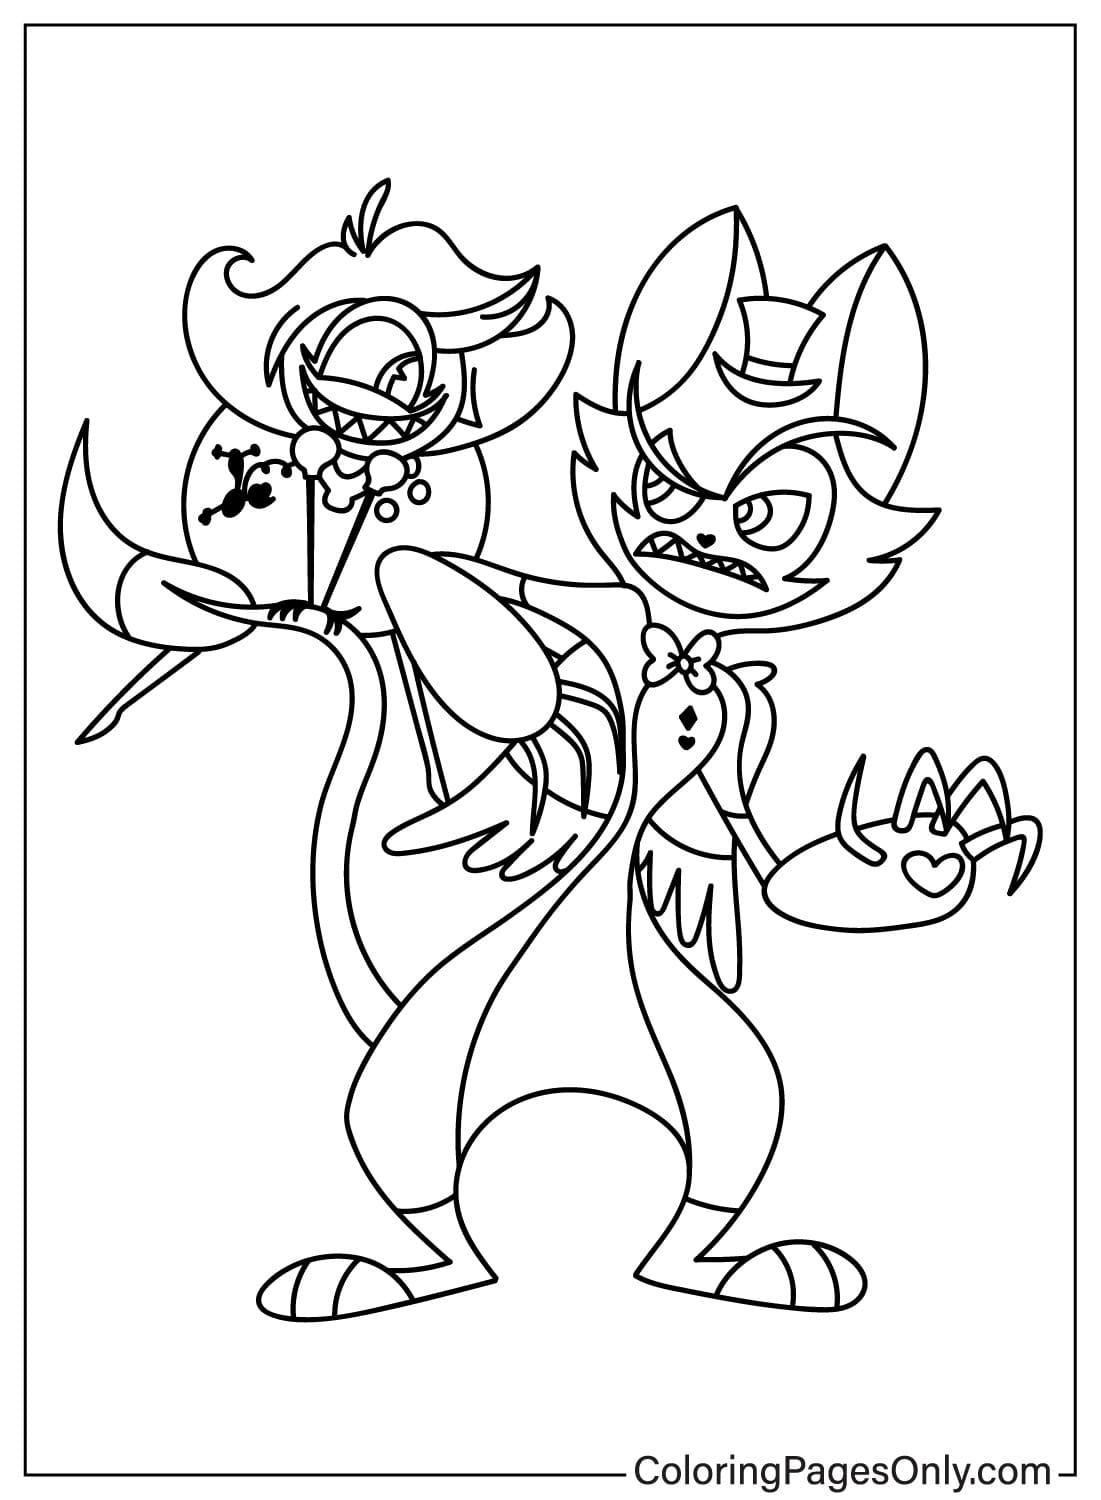 Niffty, Husk Coloring Page from Hazbin Hotel